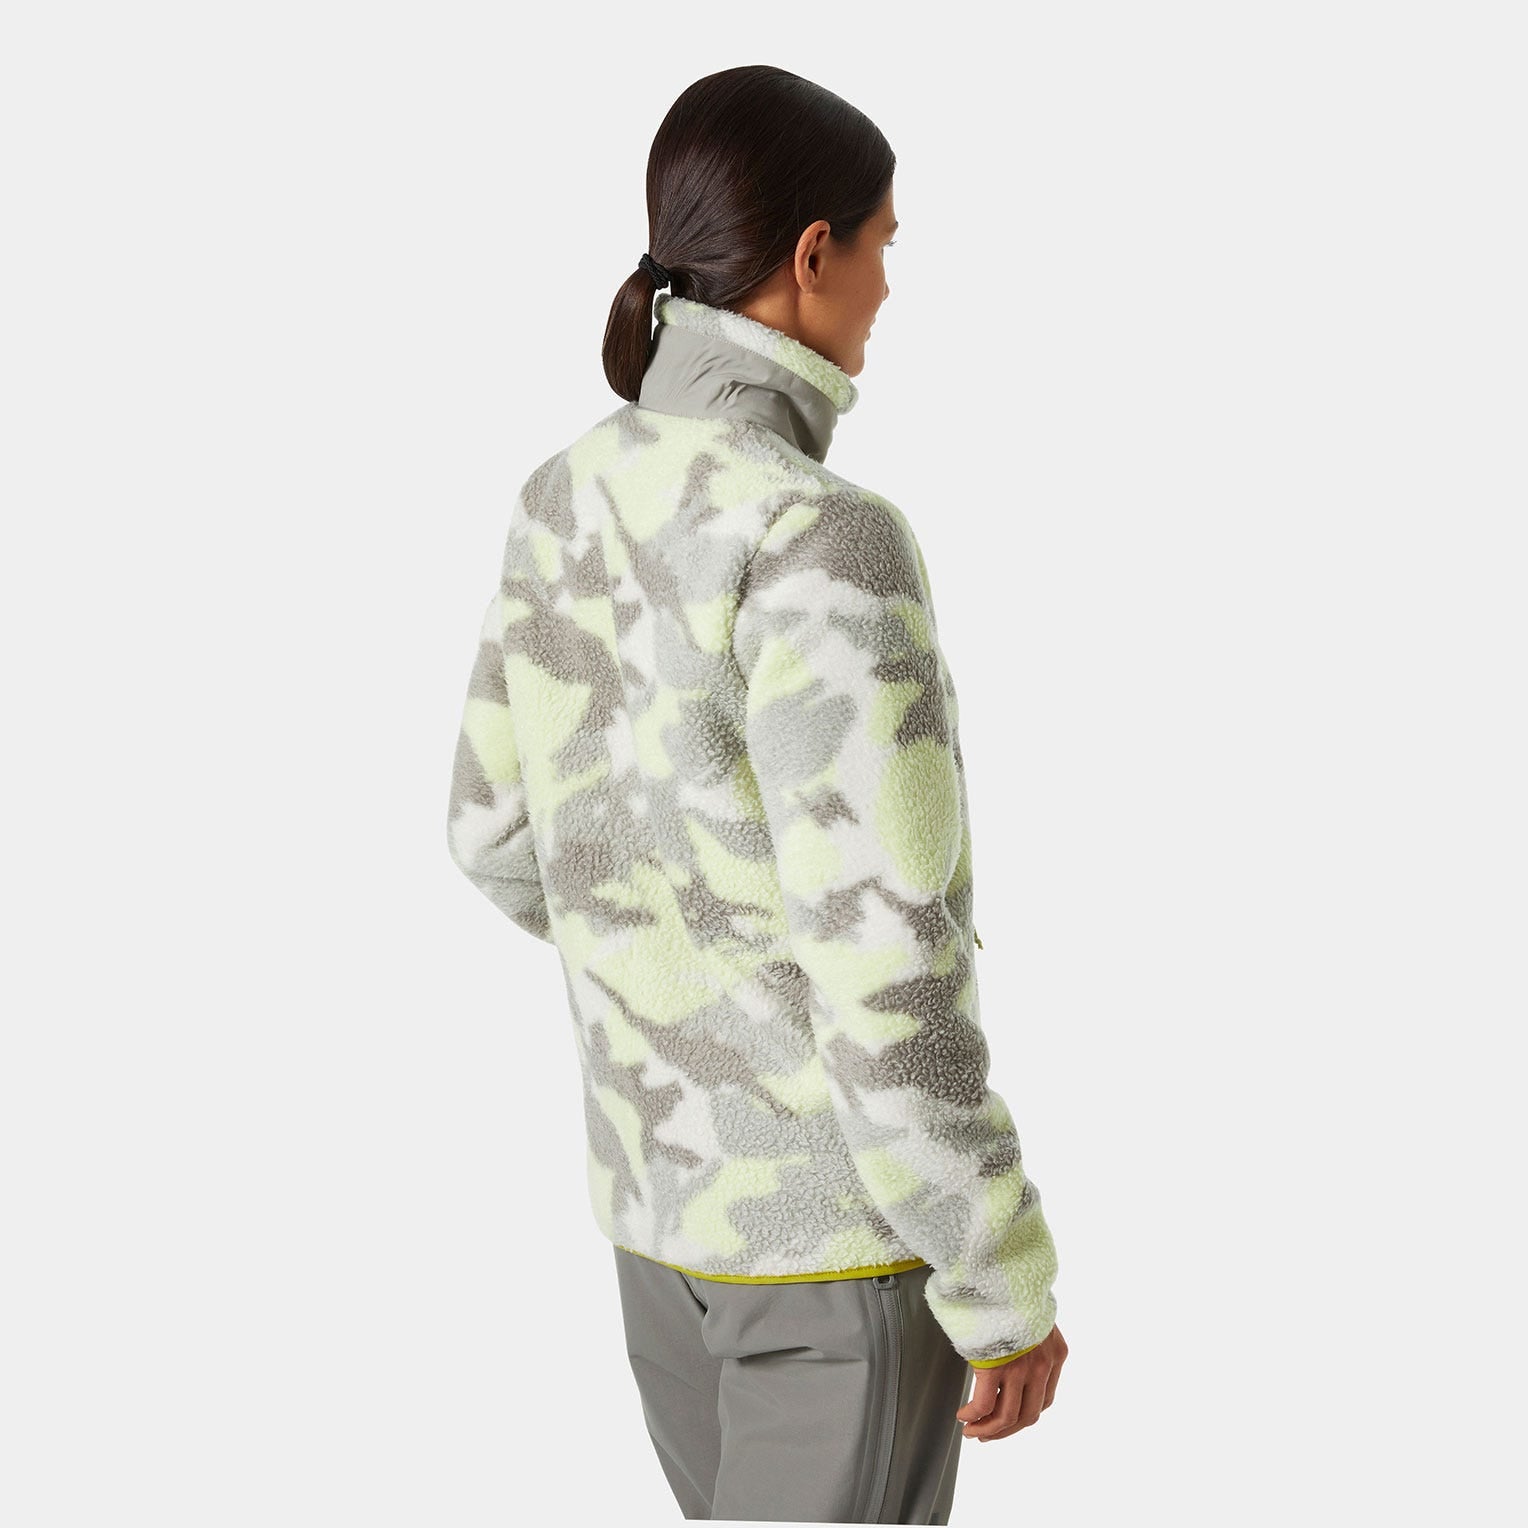 Helly Hansen Women’s Imperial Printed Pile Jacket | HELLY HANSEN | Portwest - The Outdoor Shop